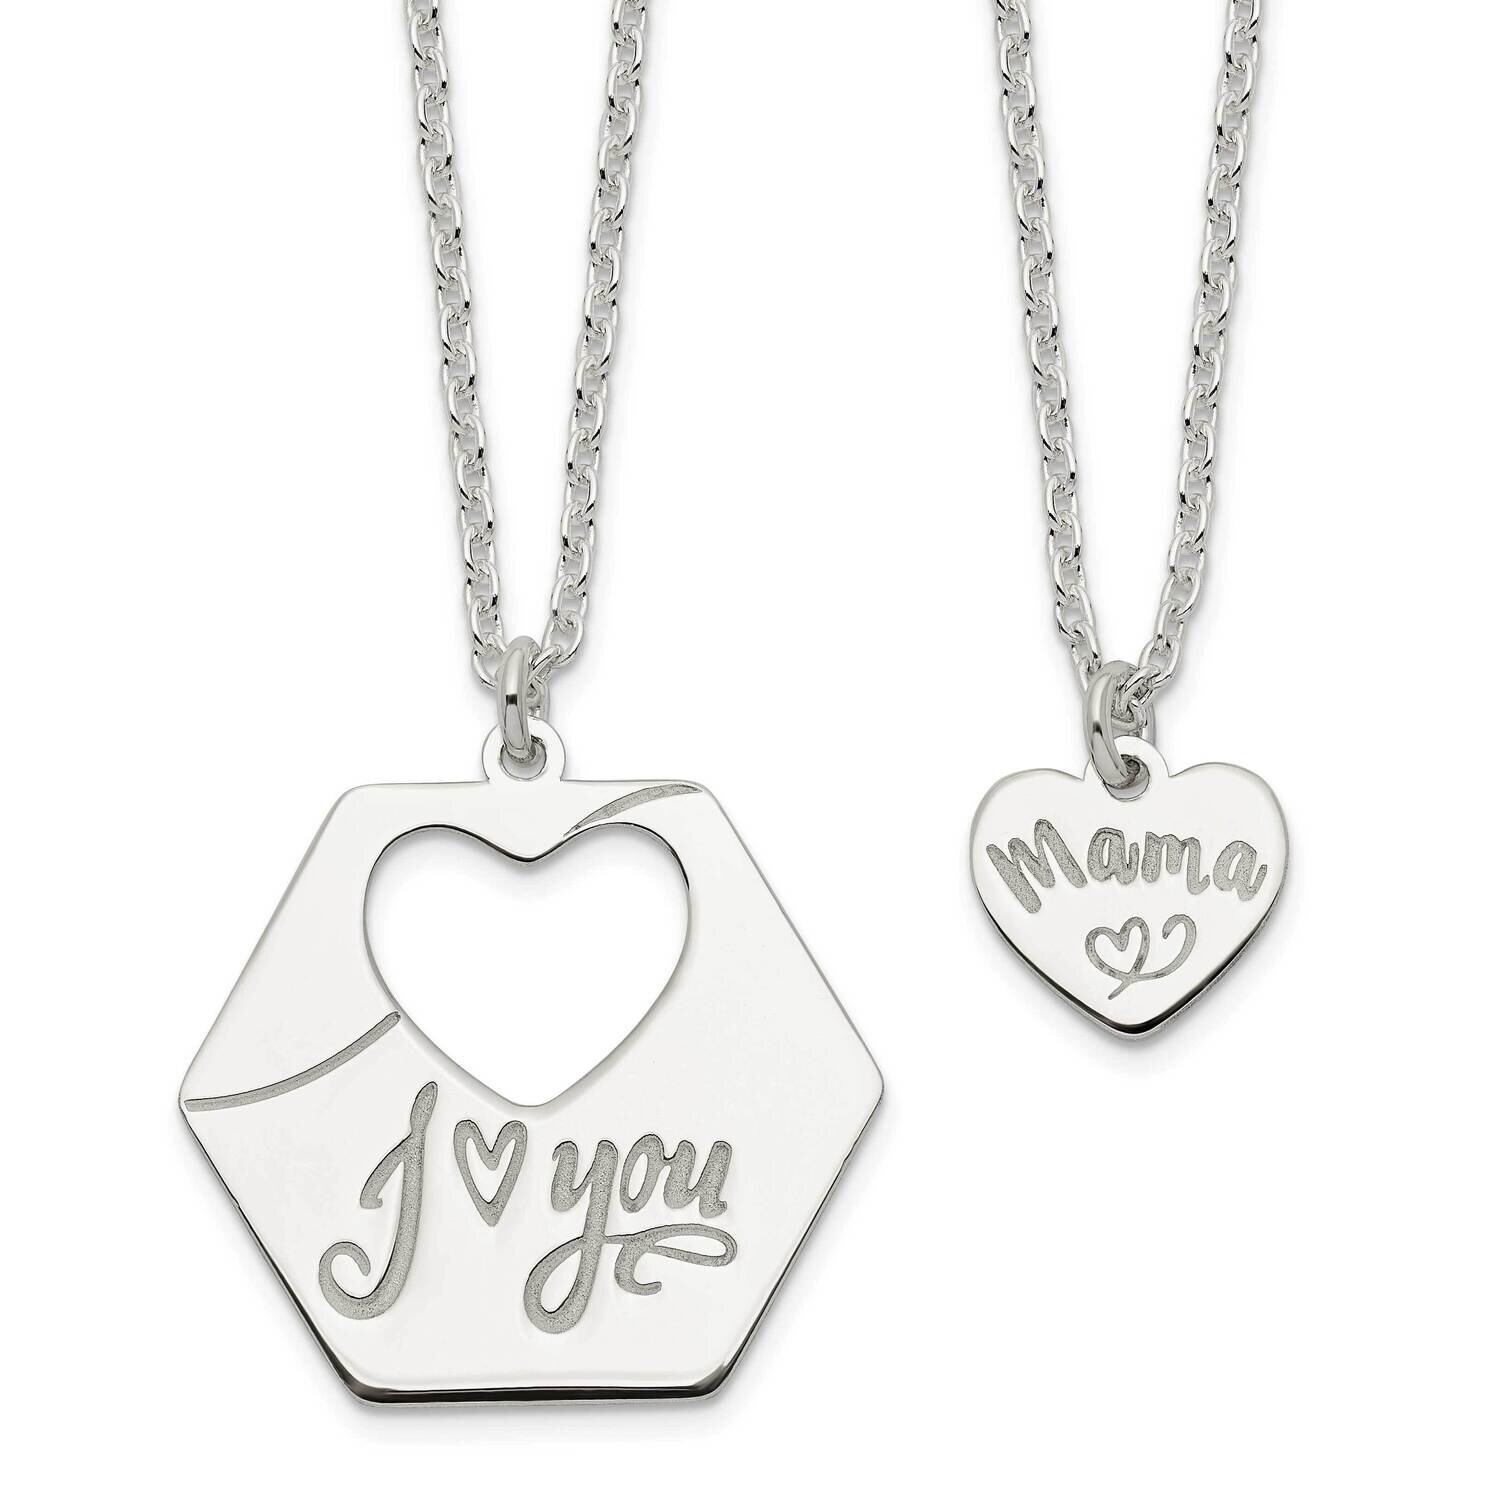 16 In I Love You Necklace and 14 In Mama Necklace Set 16 Inch Sterling Silver QG6020-16